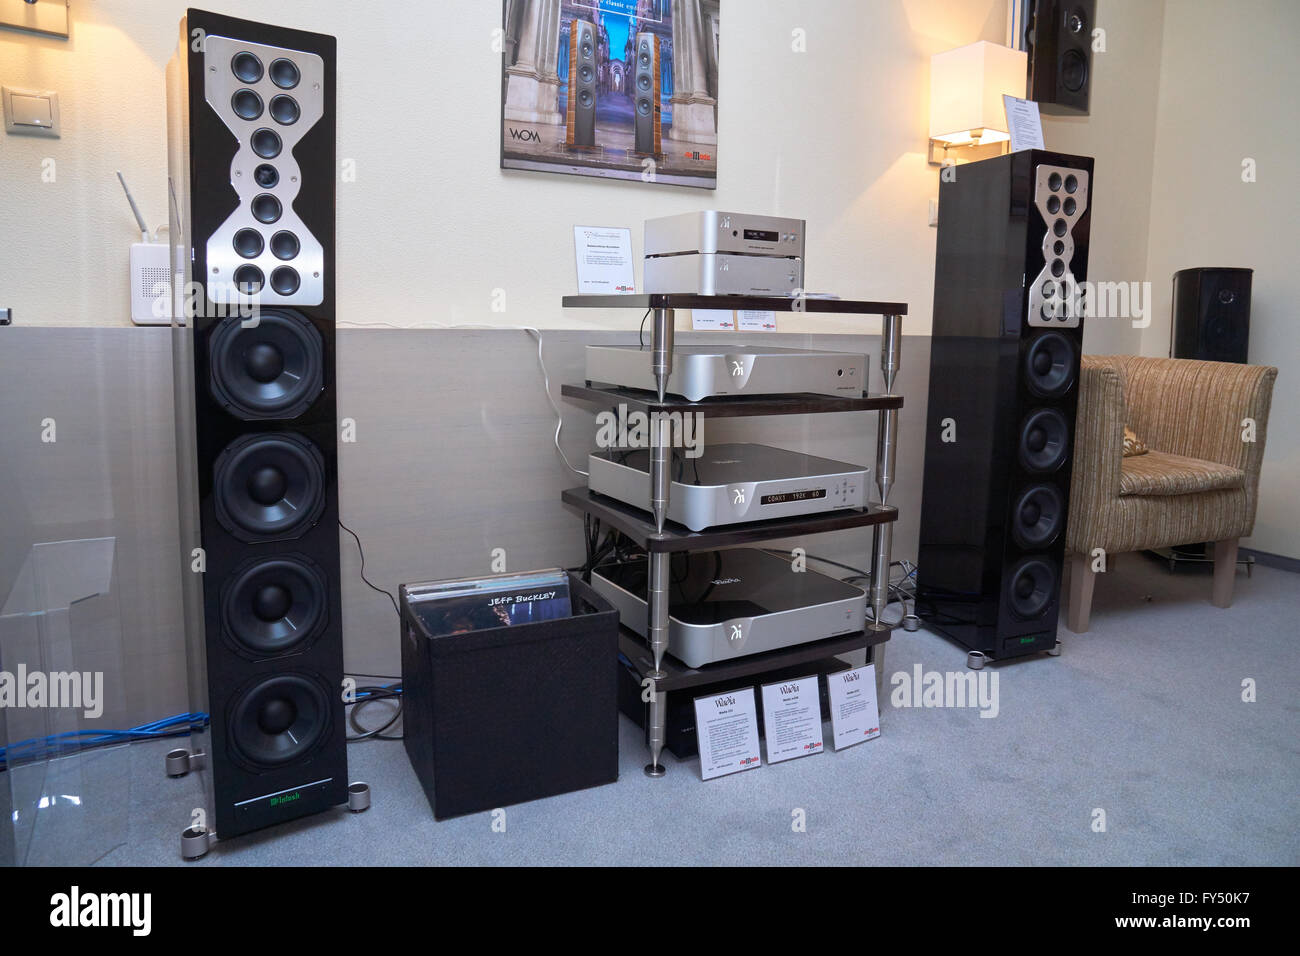 Moscow Hi Fi and High End Show, Moscow, Russia - April 15, 2016: High End audio system components in the show room Stock Photo